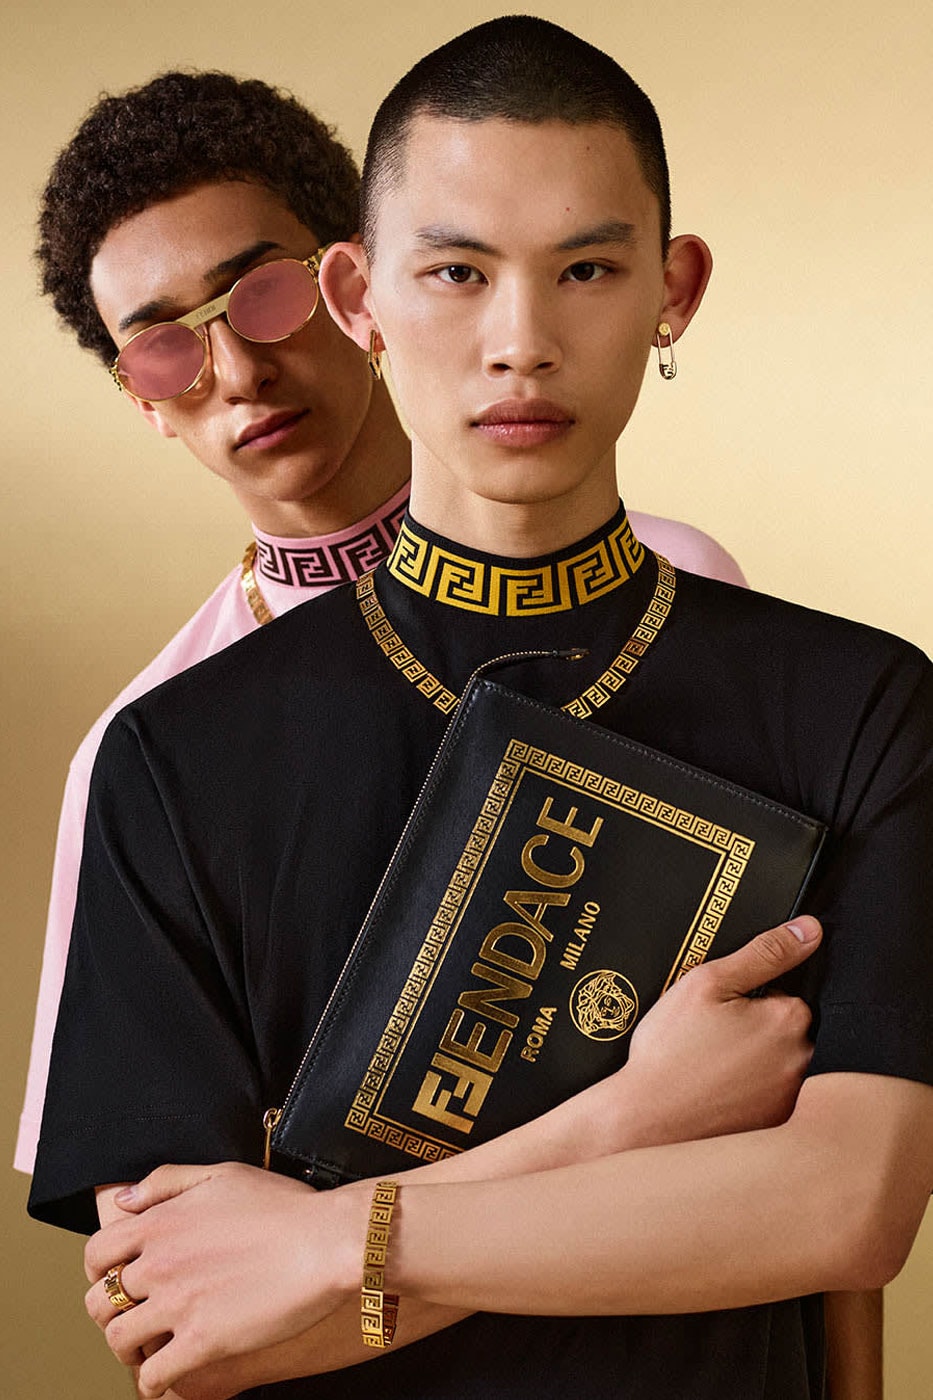 The Fendi x Versace 'Fendace' Collection Will Drop on 12 May